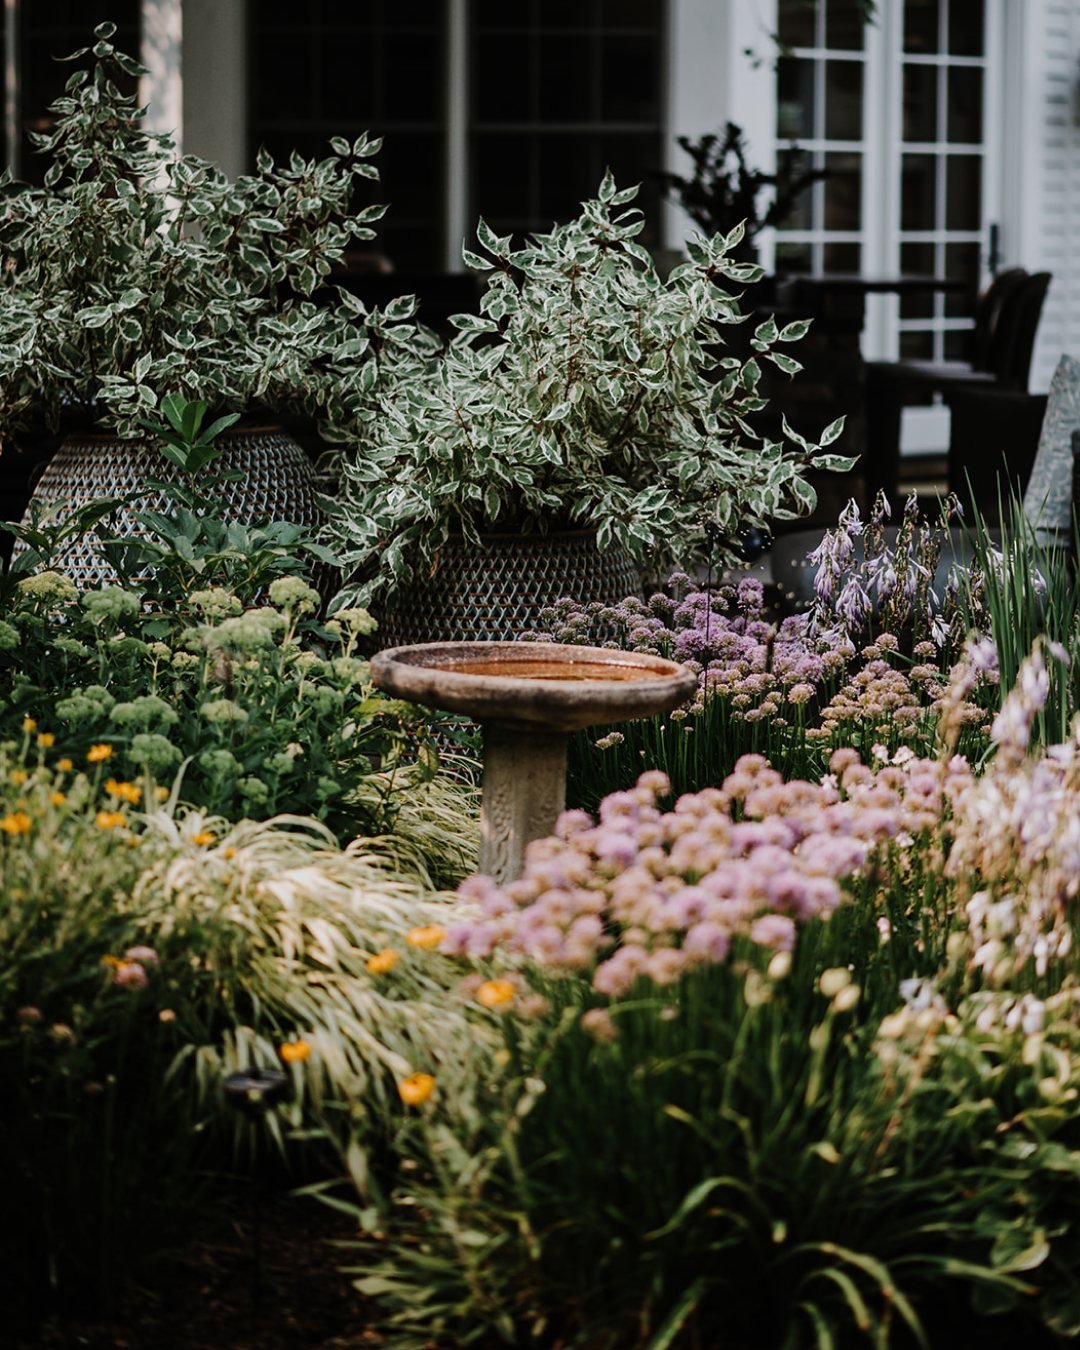 Each spring we find joy in the return to green. The moment the weather warms, we flow outwards. We tend to our outdoor spaces as an extension of our home and consider how flowers and furniture fill them. We practice patience as we await summer's boun